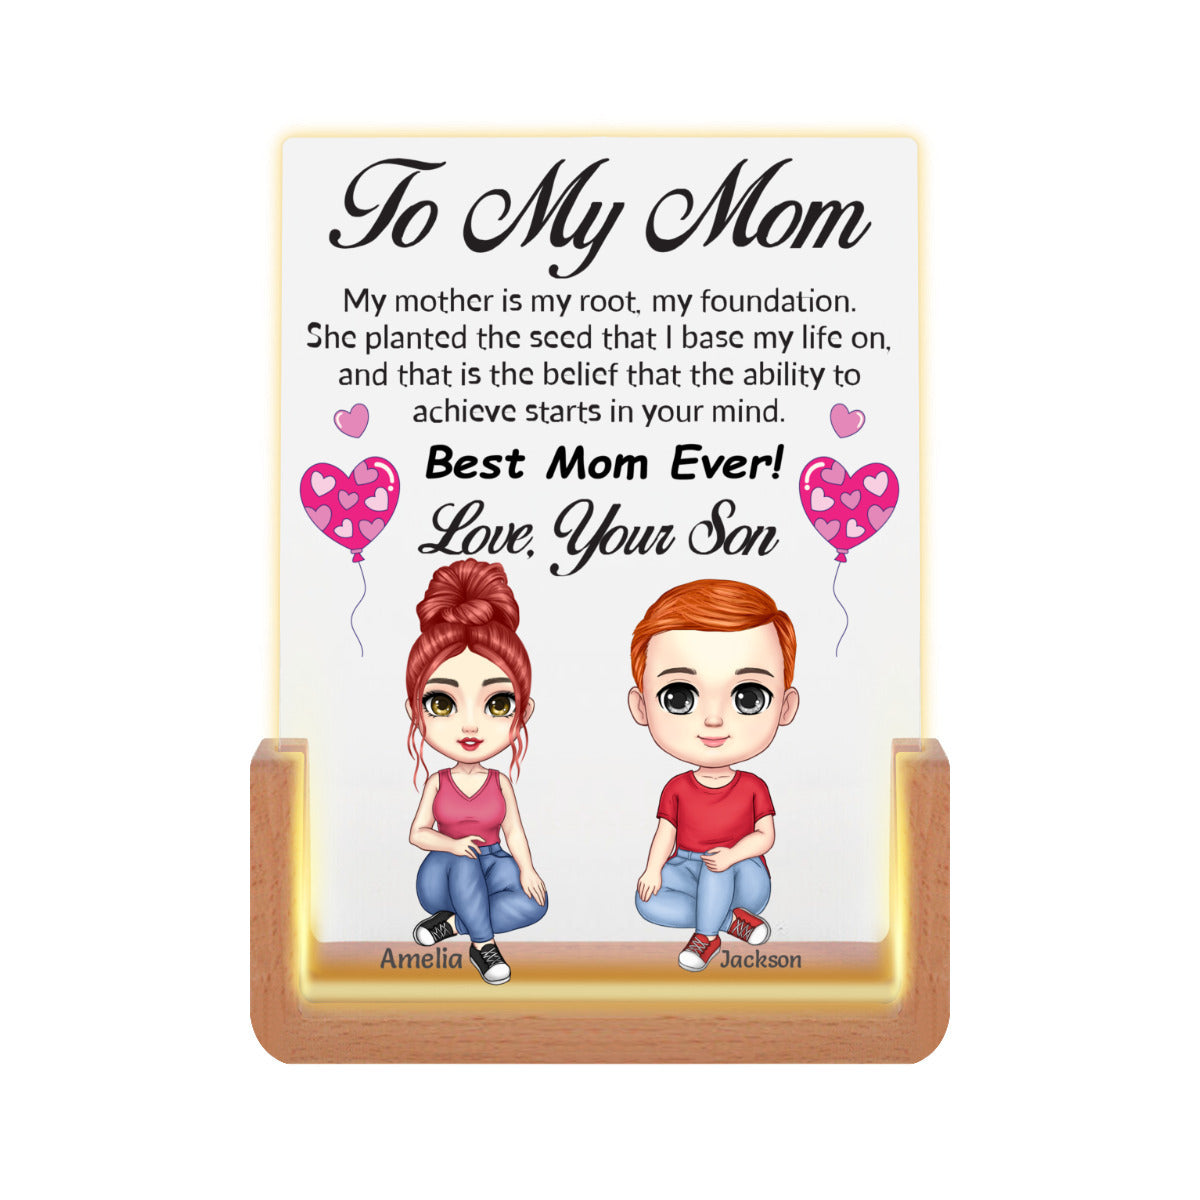 My Mother is My Root- Personalized Acrylic Plaque Night Light For Mom